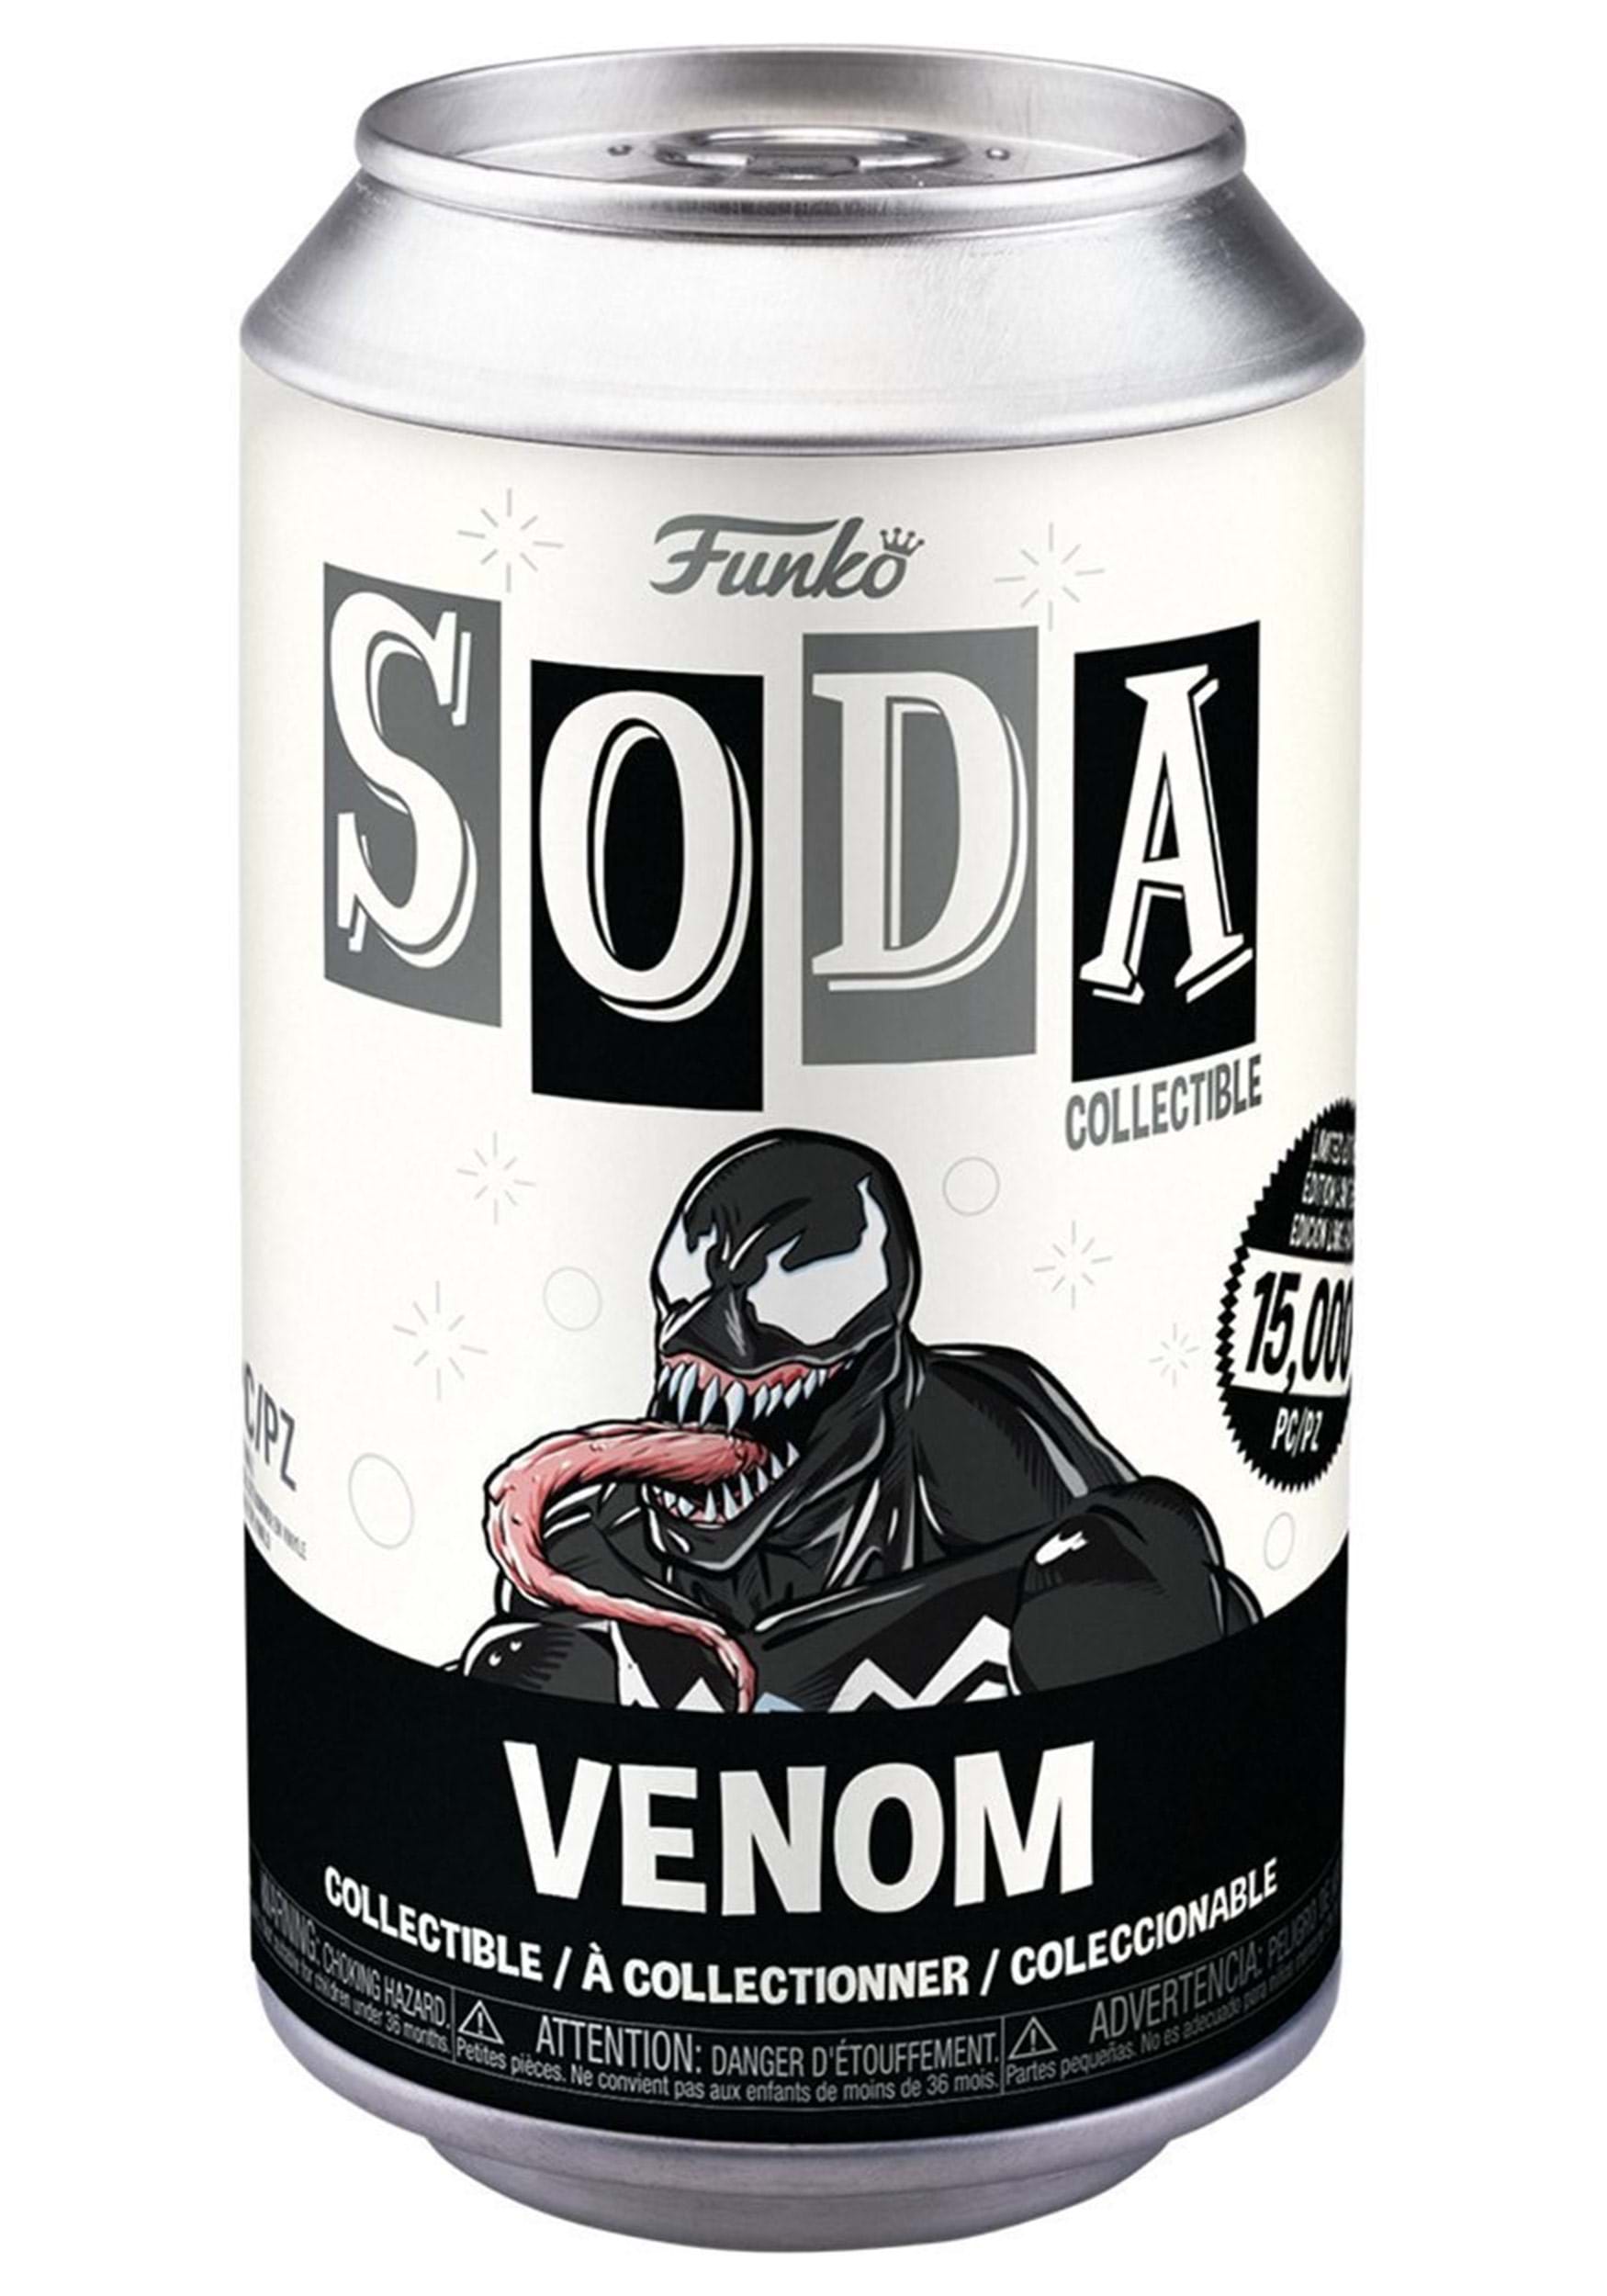 Today My Friend You Drunk the Venom LP, The Drin